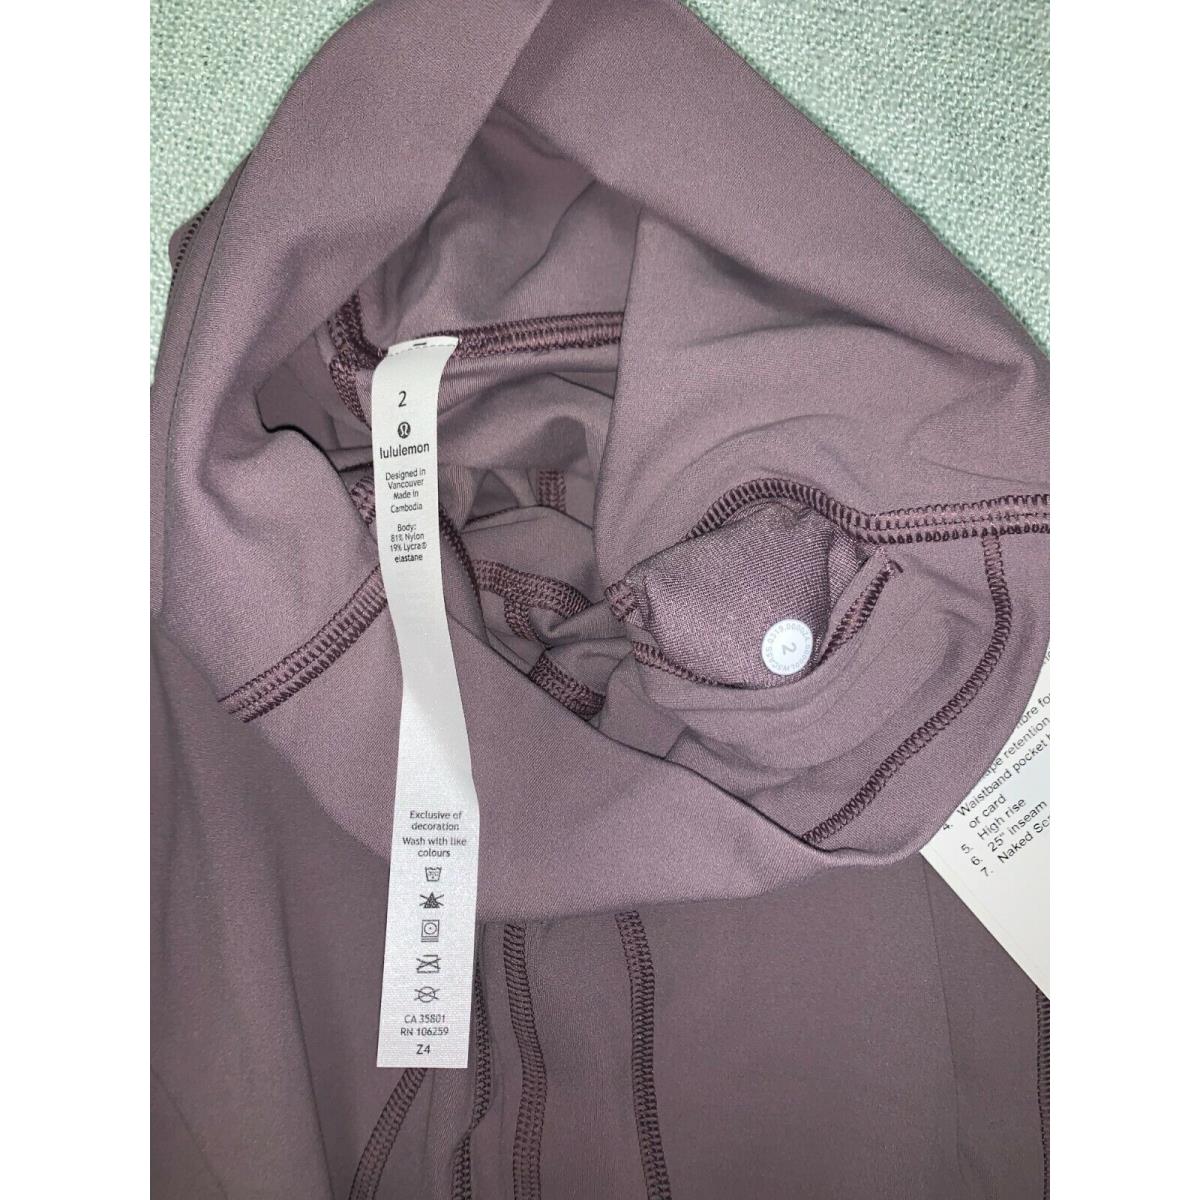 Lululemon clothing  - Frosted Mulberry 2